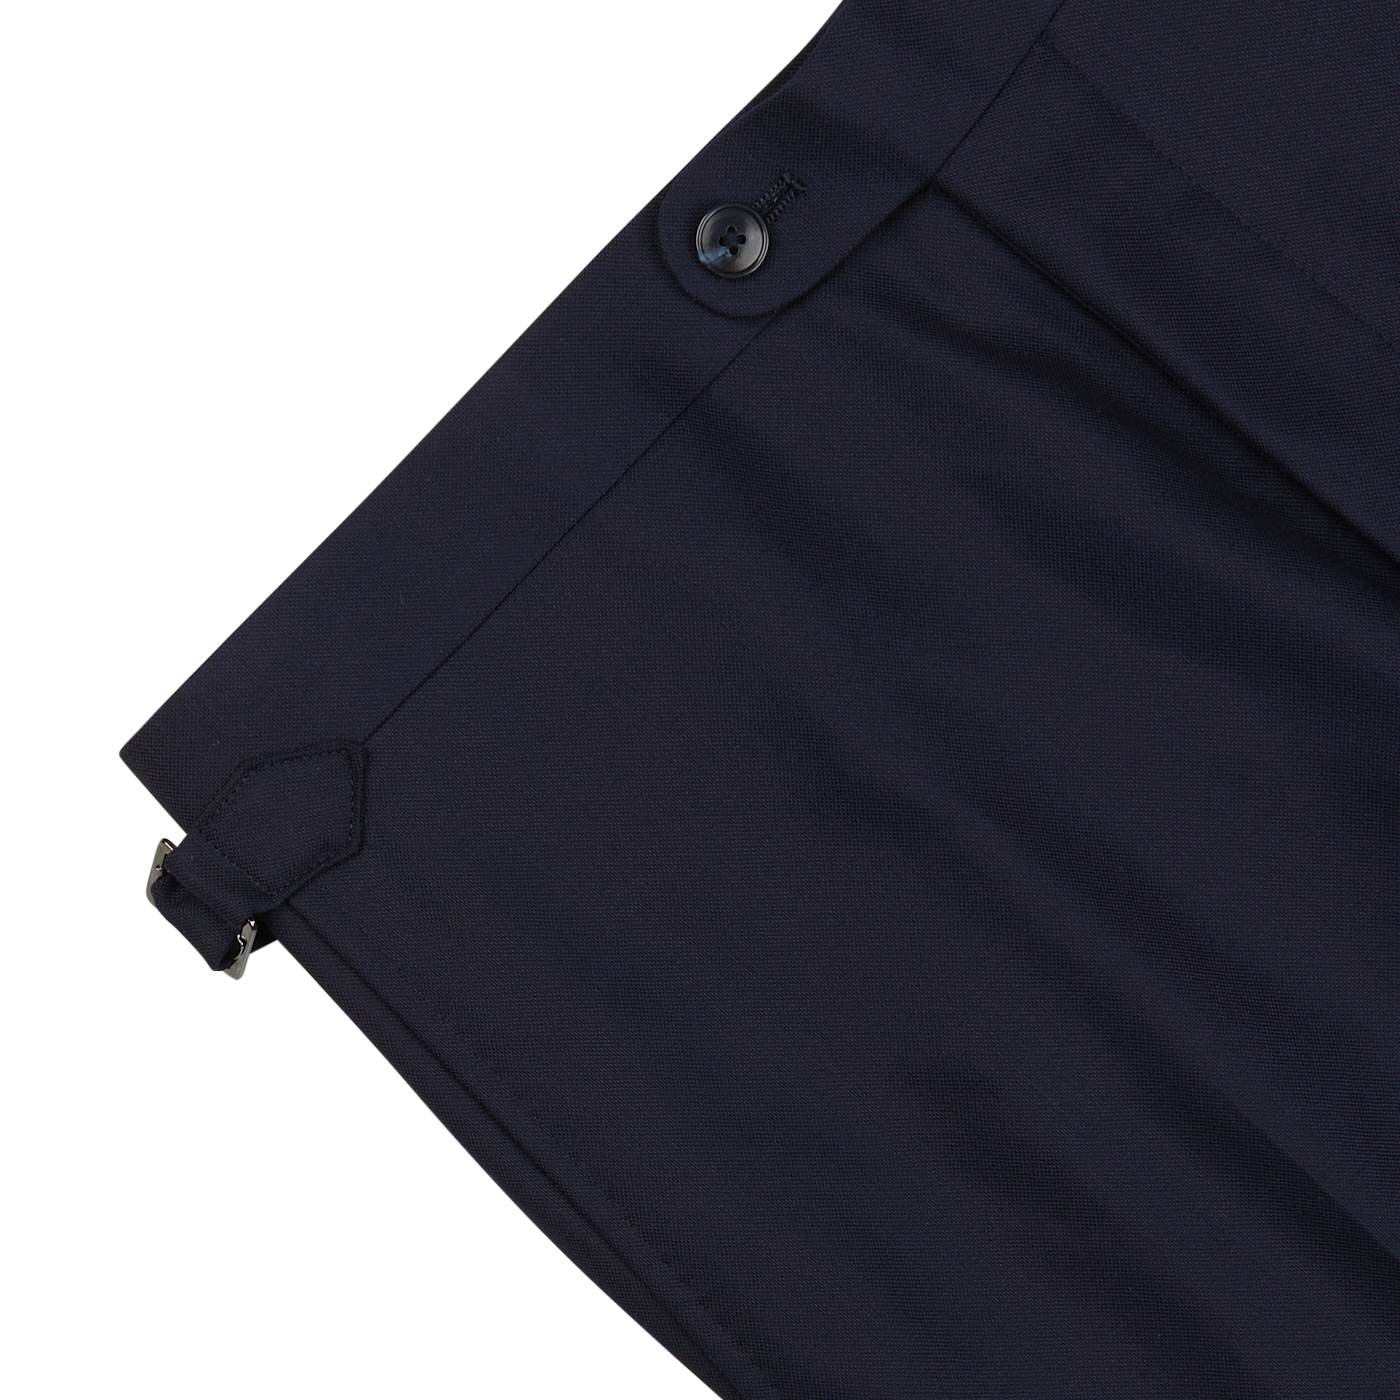 Close-up of a Baltzar Sartorial Navy Super 100's Wool Flat Front Suit Trousers waistband with a button closure and a metal clasp detail on a white background.